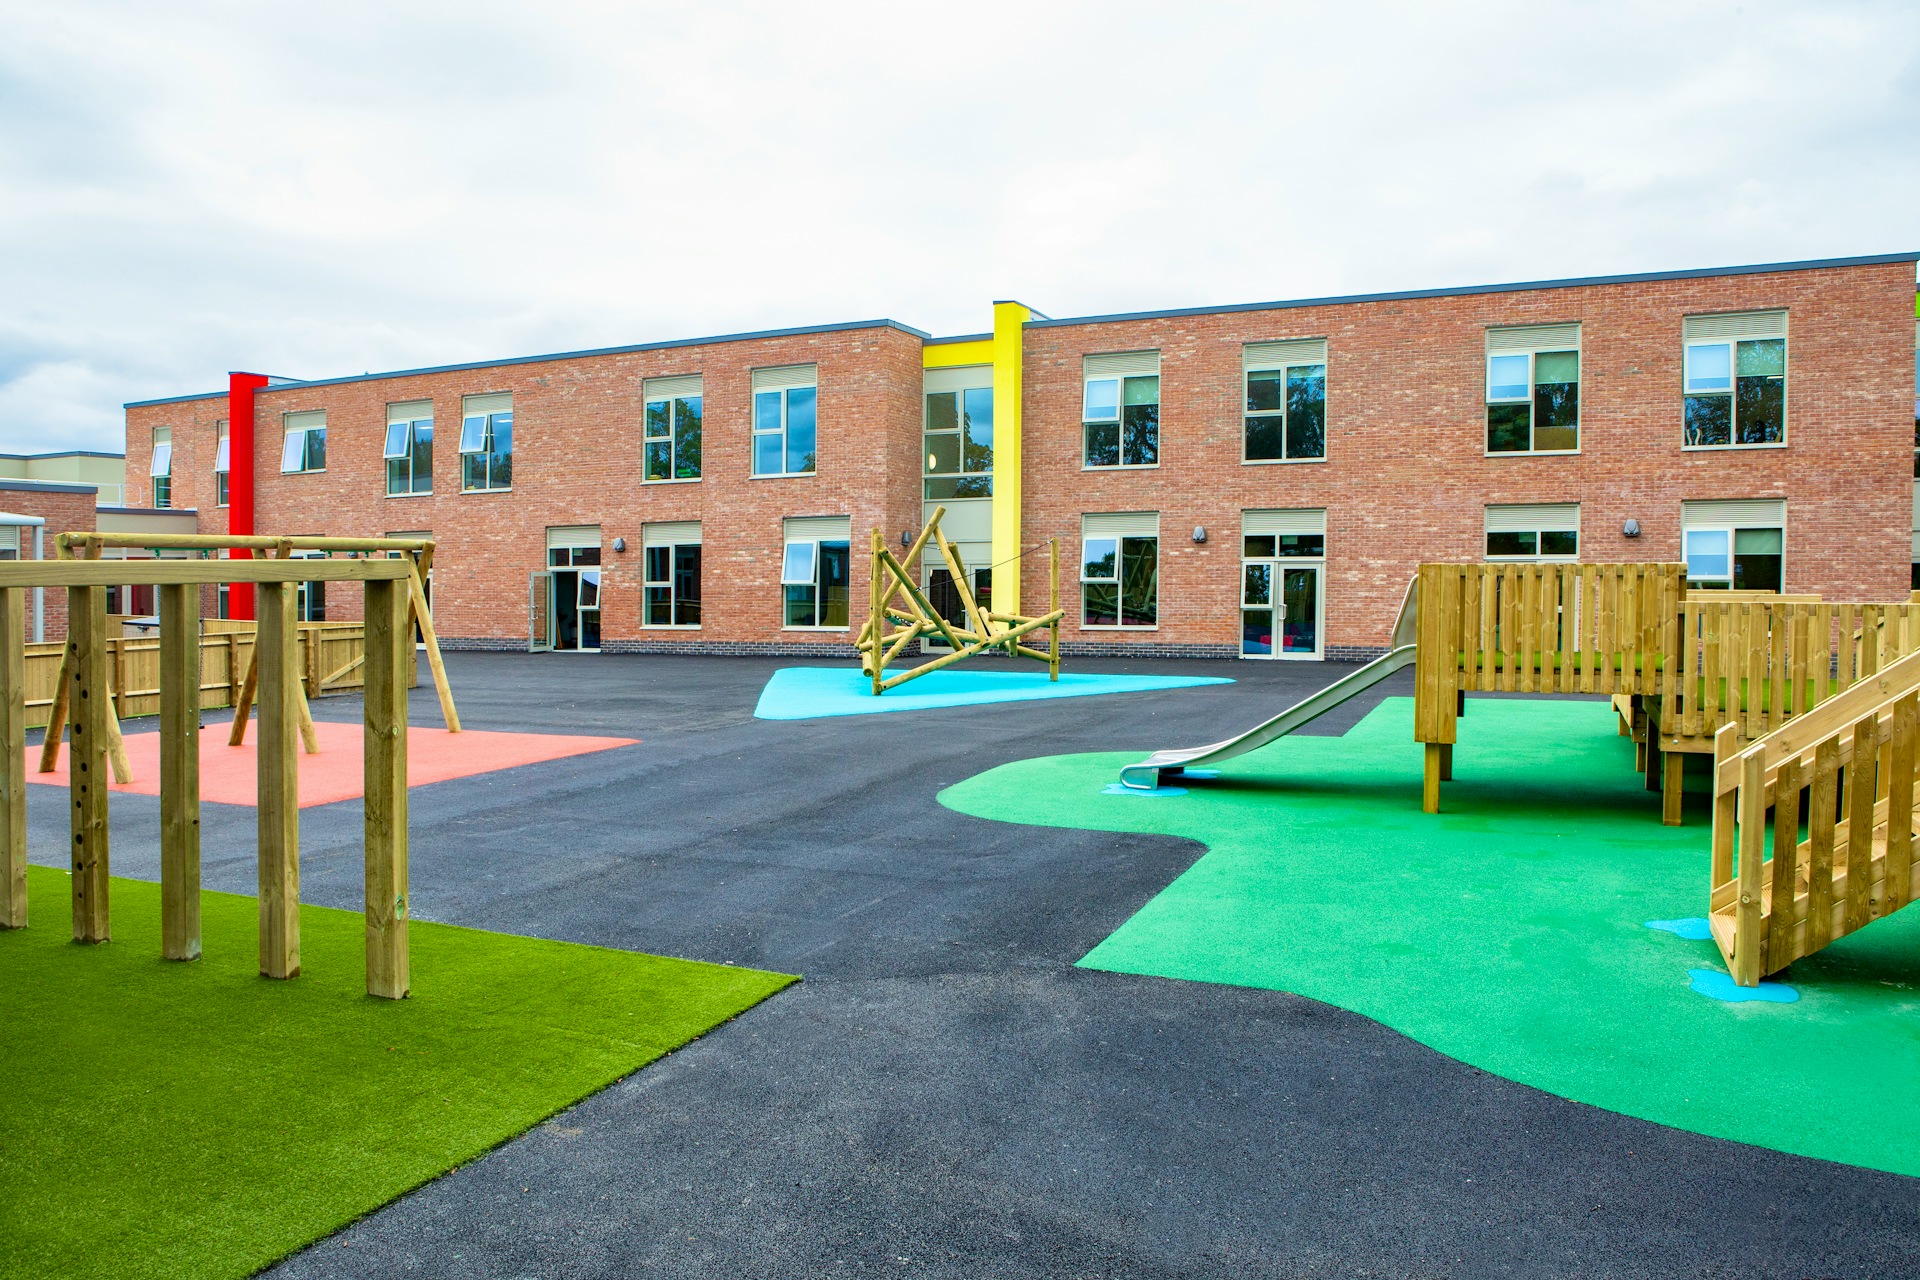 Photo of Newark Orchard School showing the playground